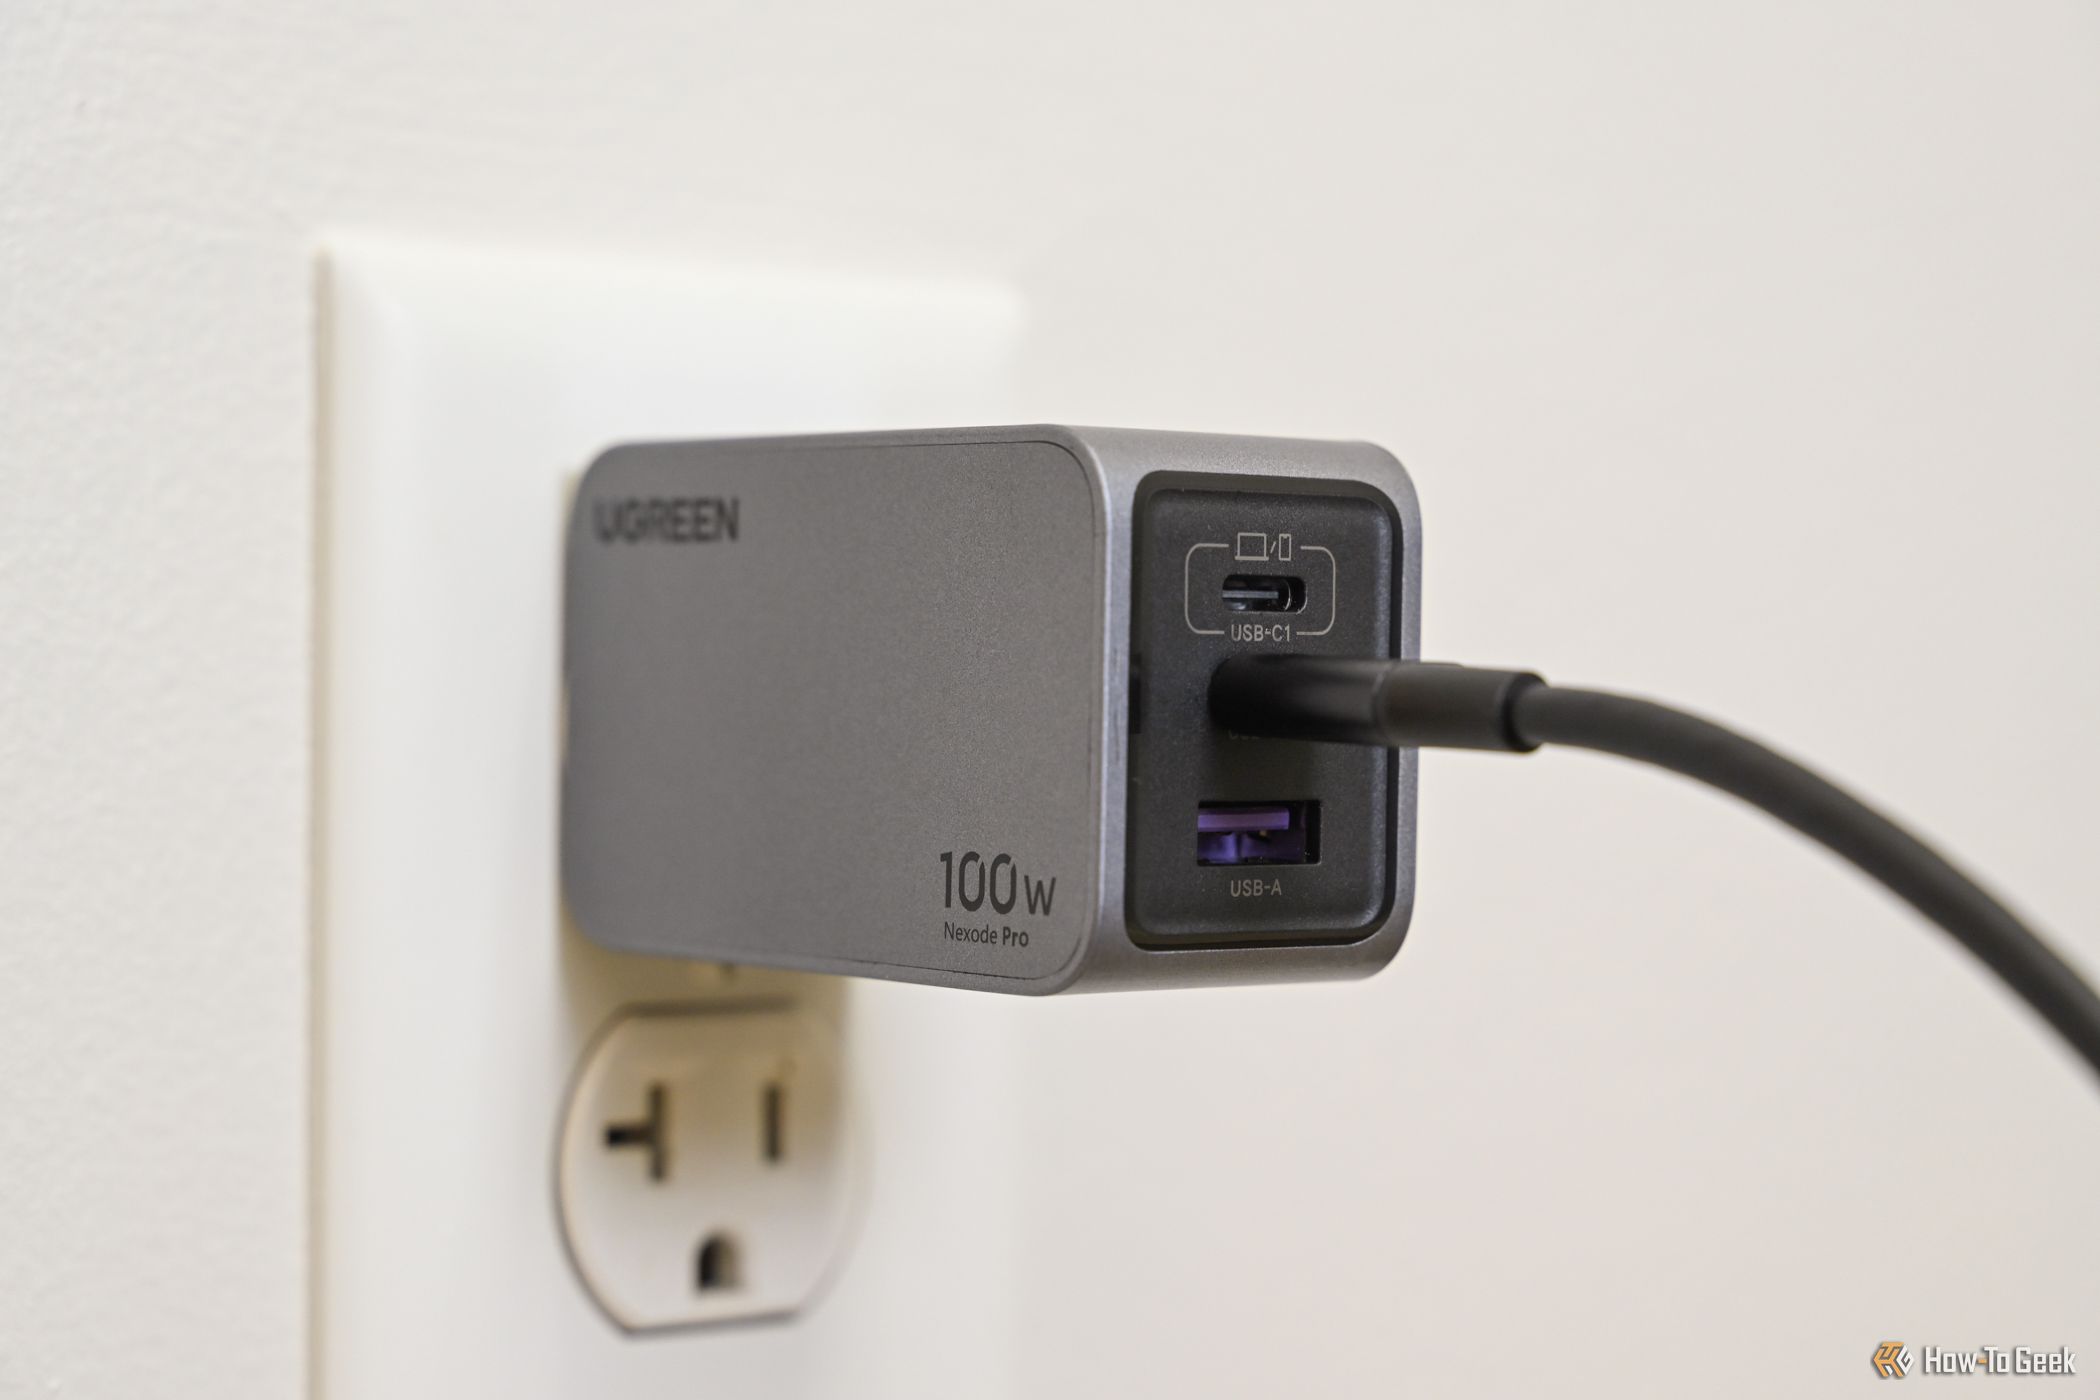 The Ugreen Nexode Pro 100W USB C Wall Charger plugged into an outlet